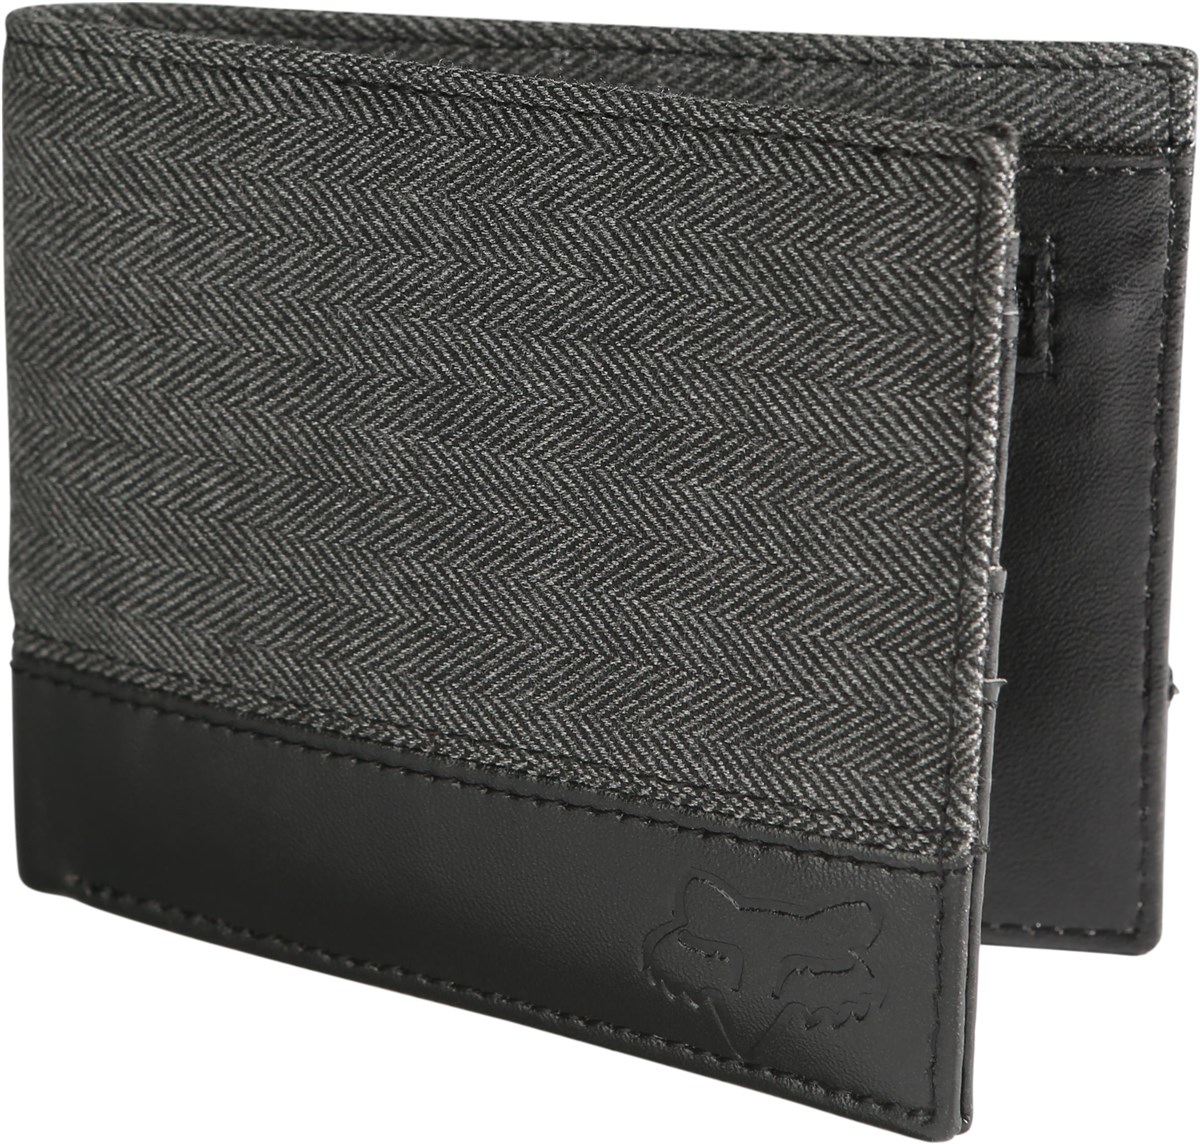 Fox Clothing Bullet Proof Wallet product image